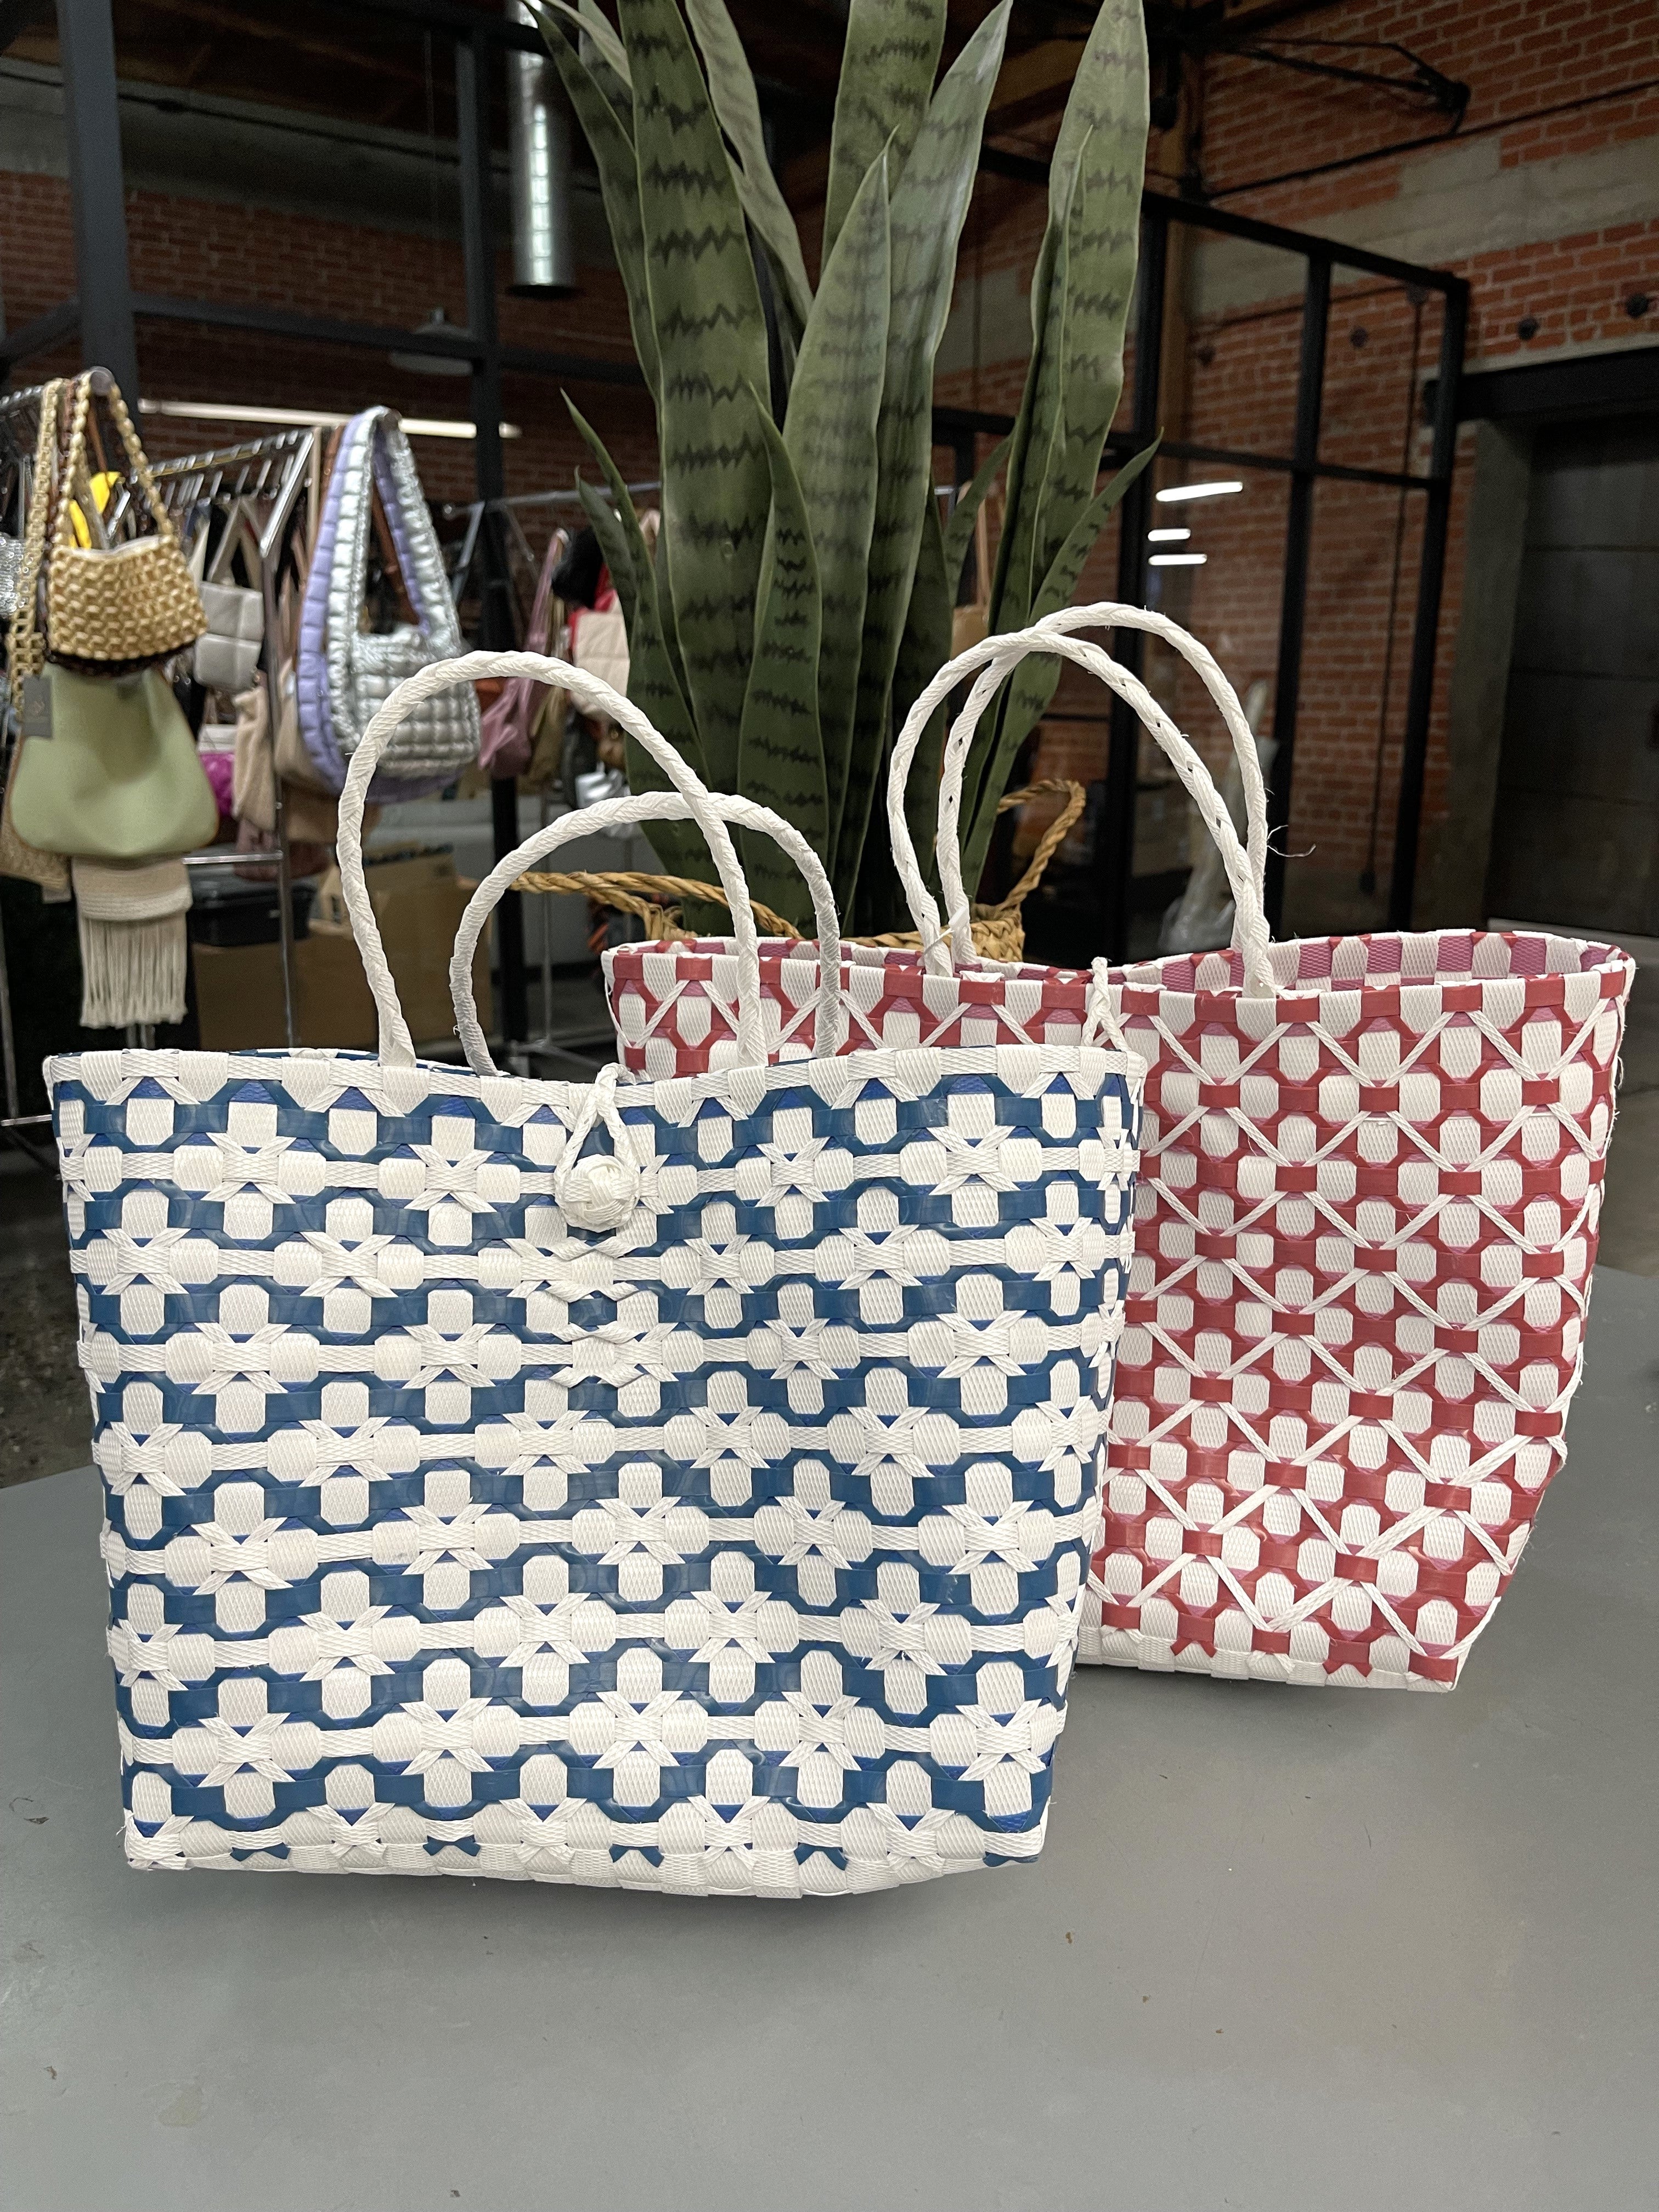 The Woven Tote bag